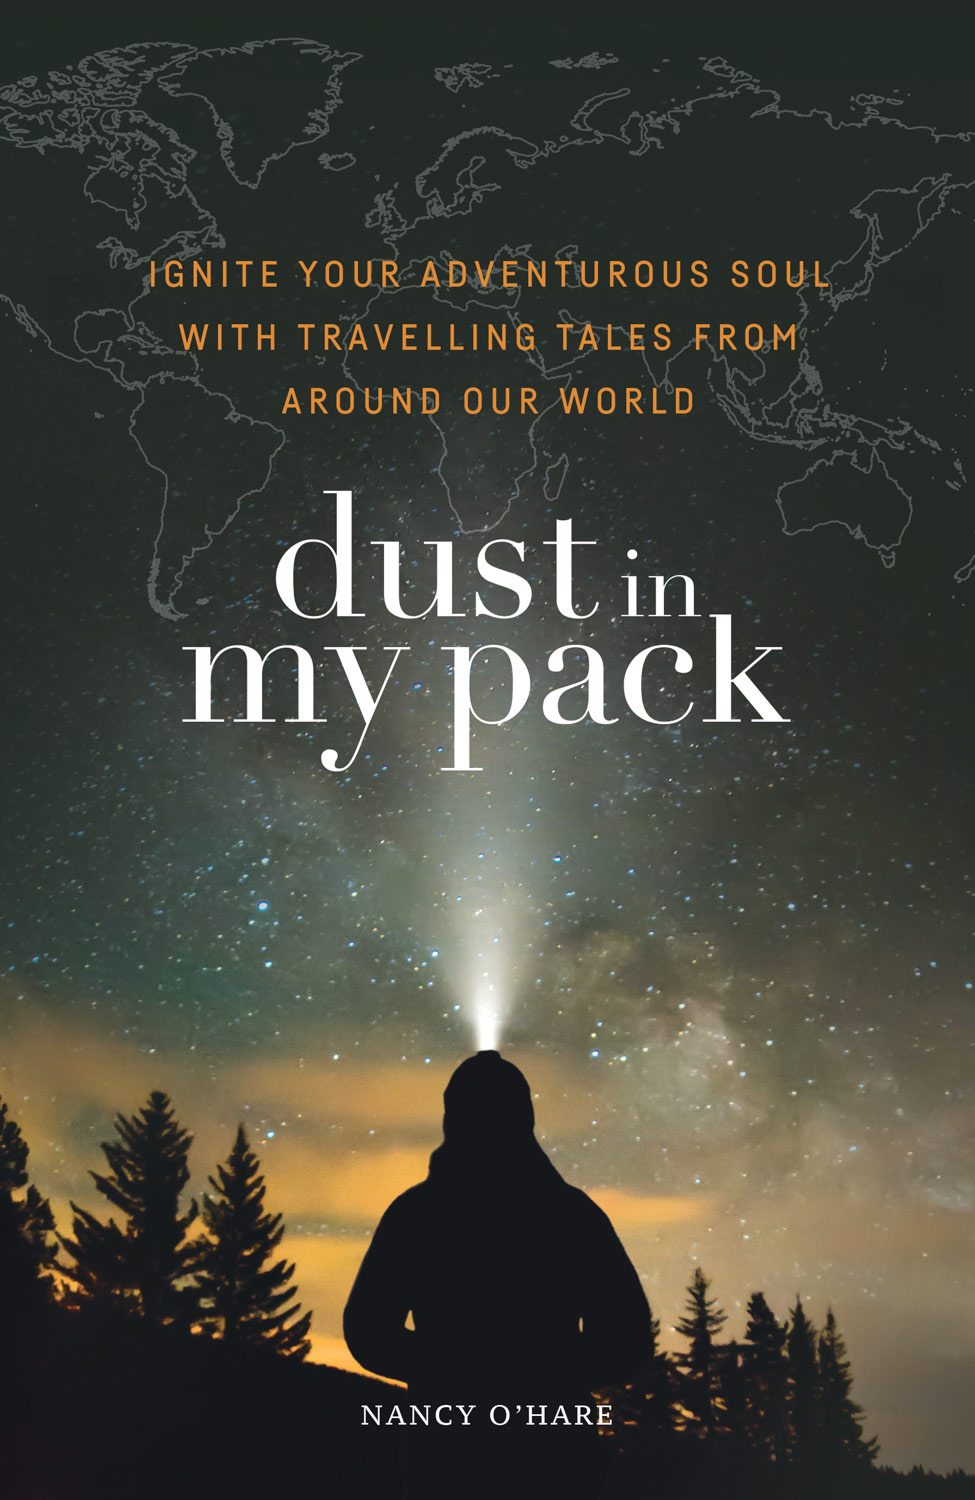 Dust-in-My-Pack-Adventure-Travel